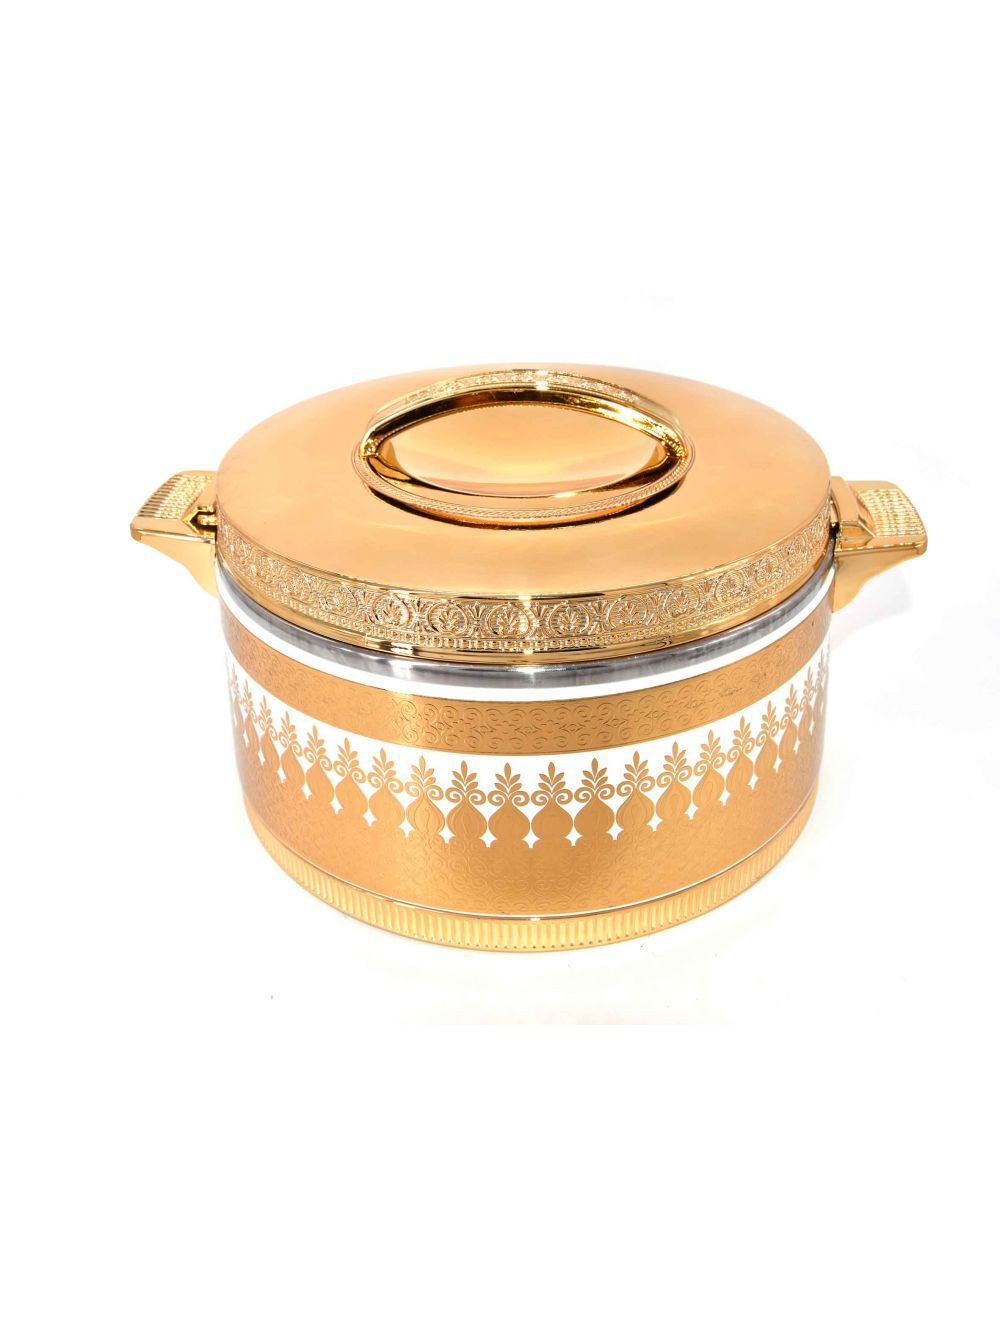 Hotpot Metal Gold and Silver Design 5.5L